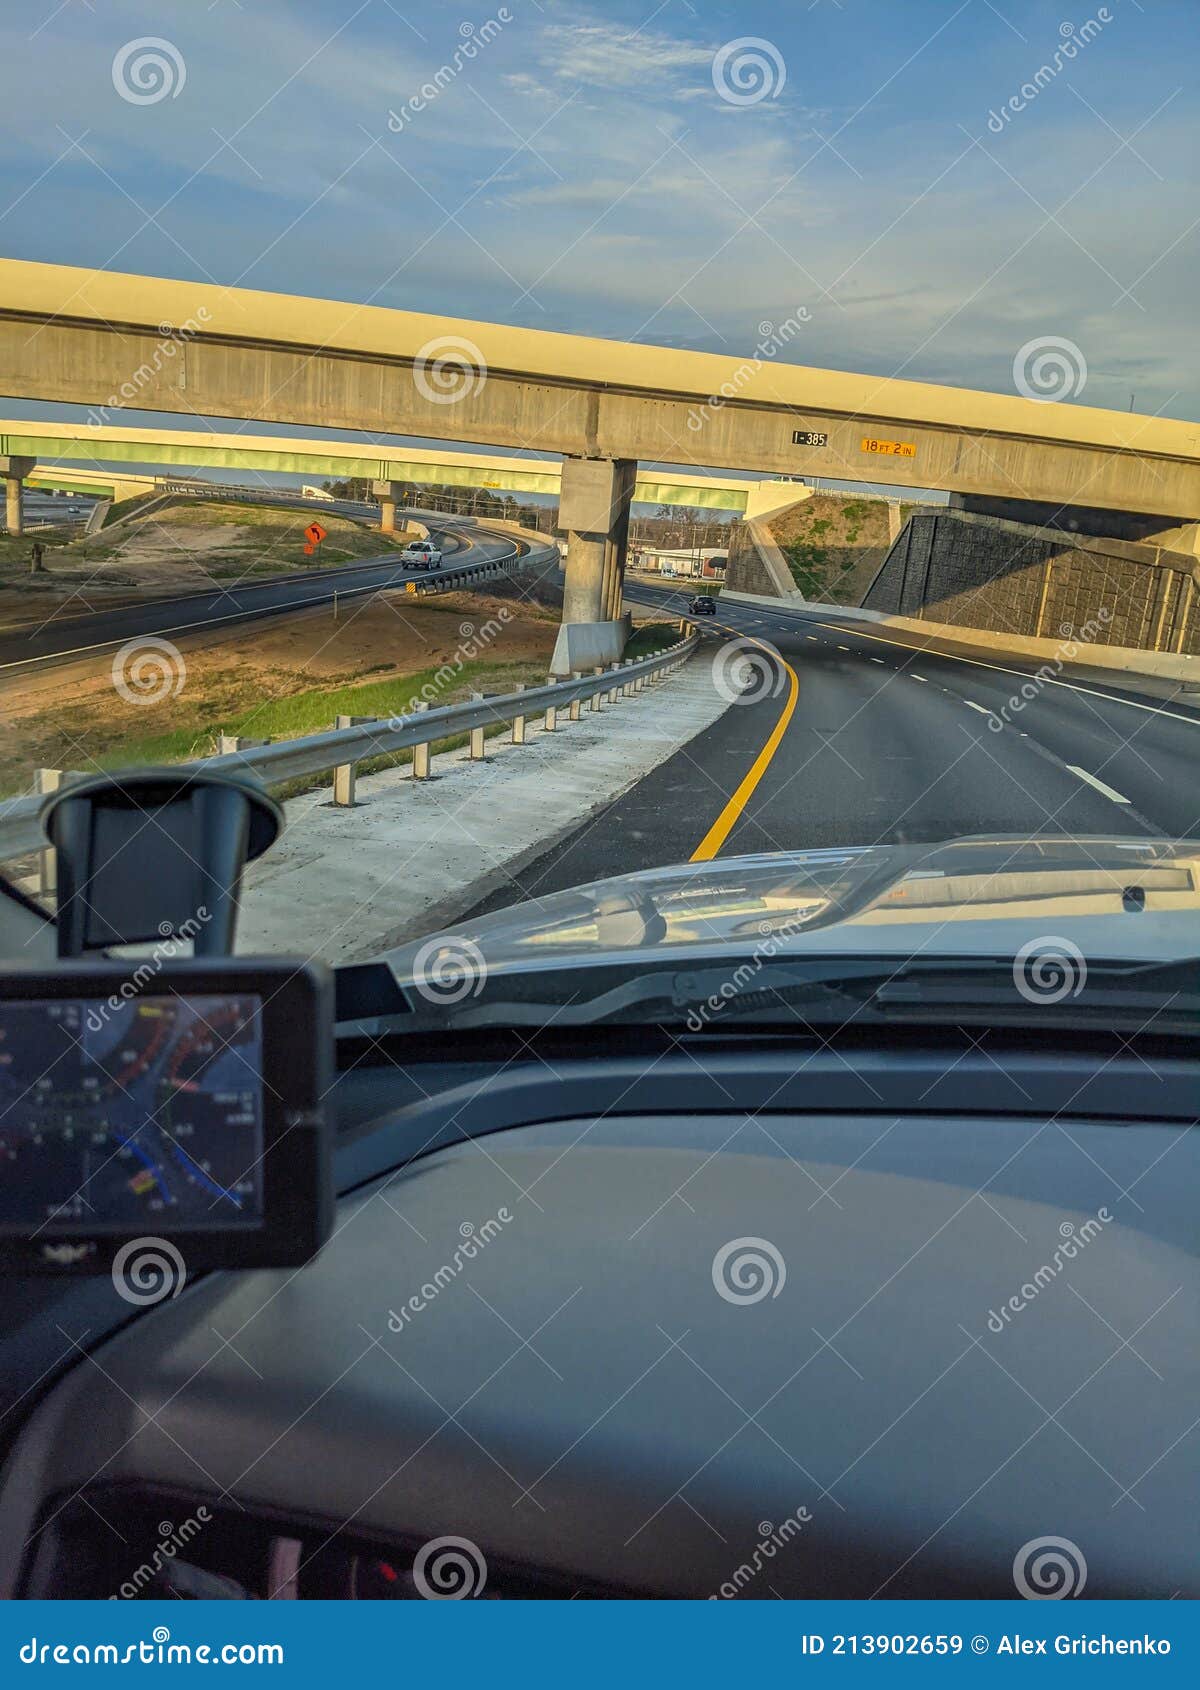 view from truck cockpit on a freeway